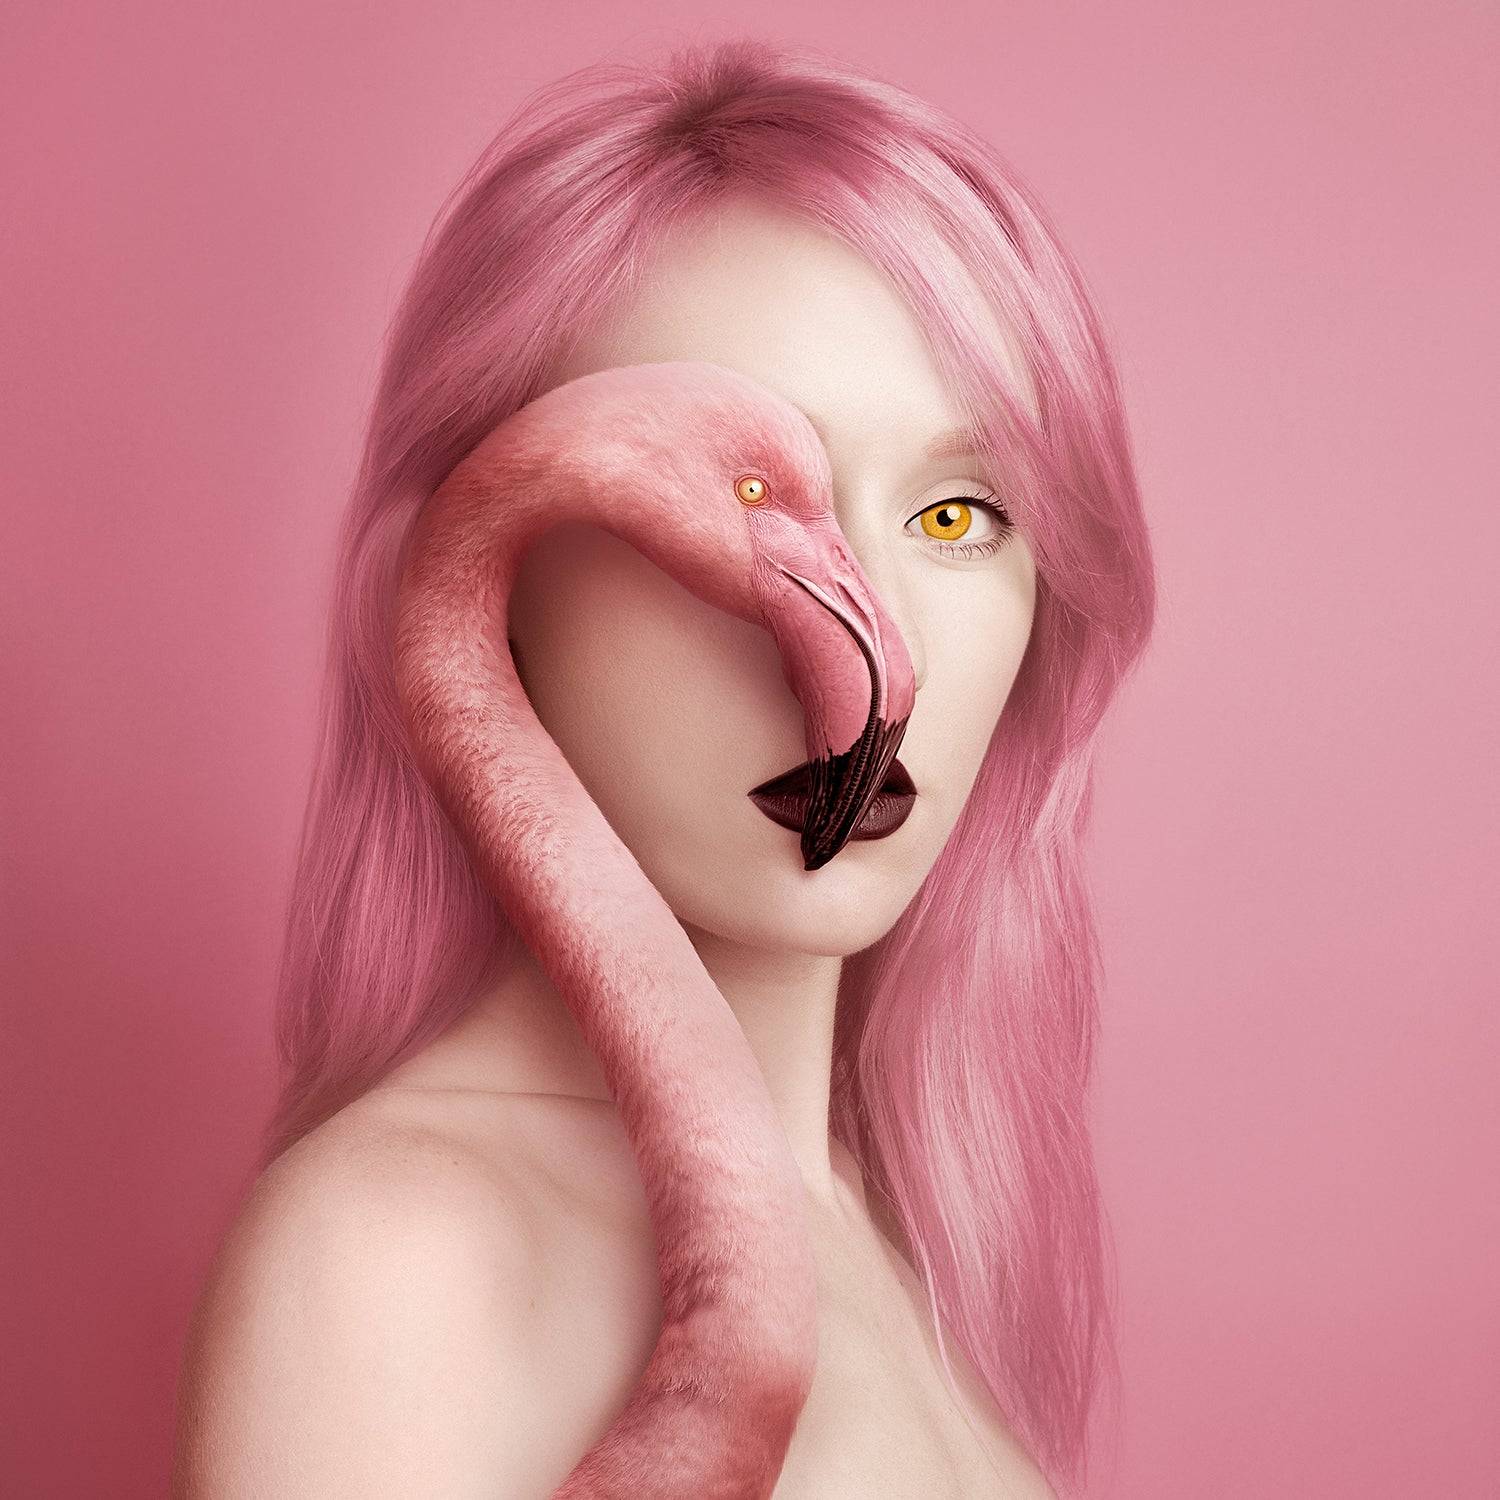 Woman portrait in pink with a flamingo